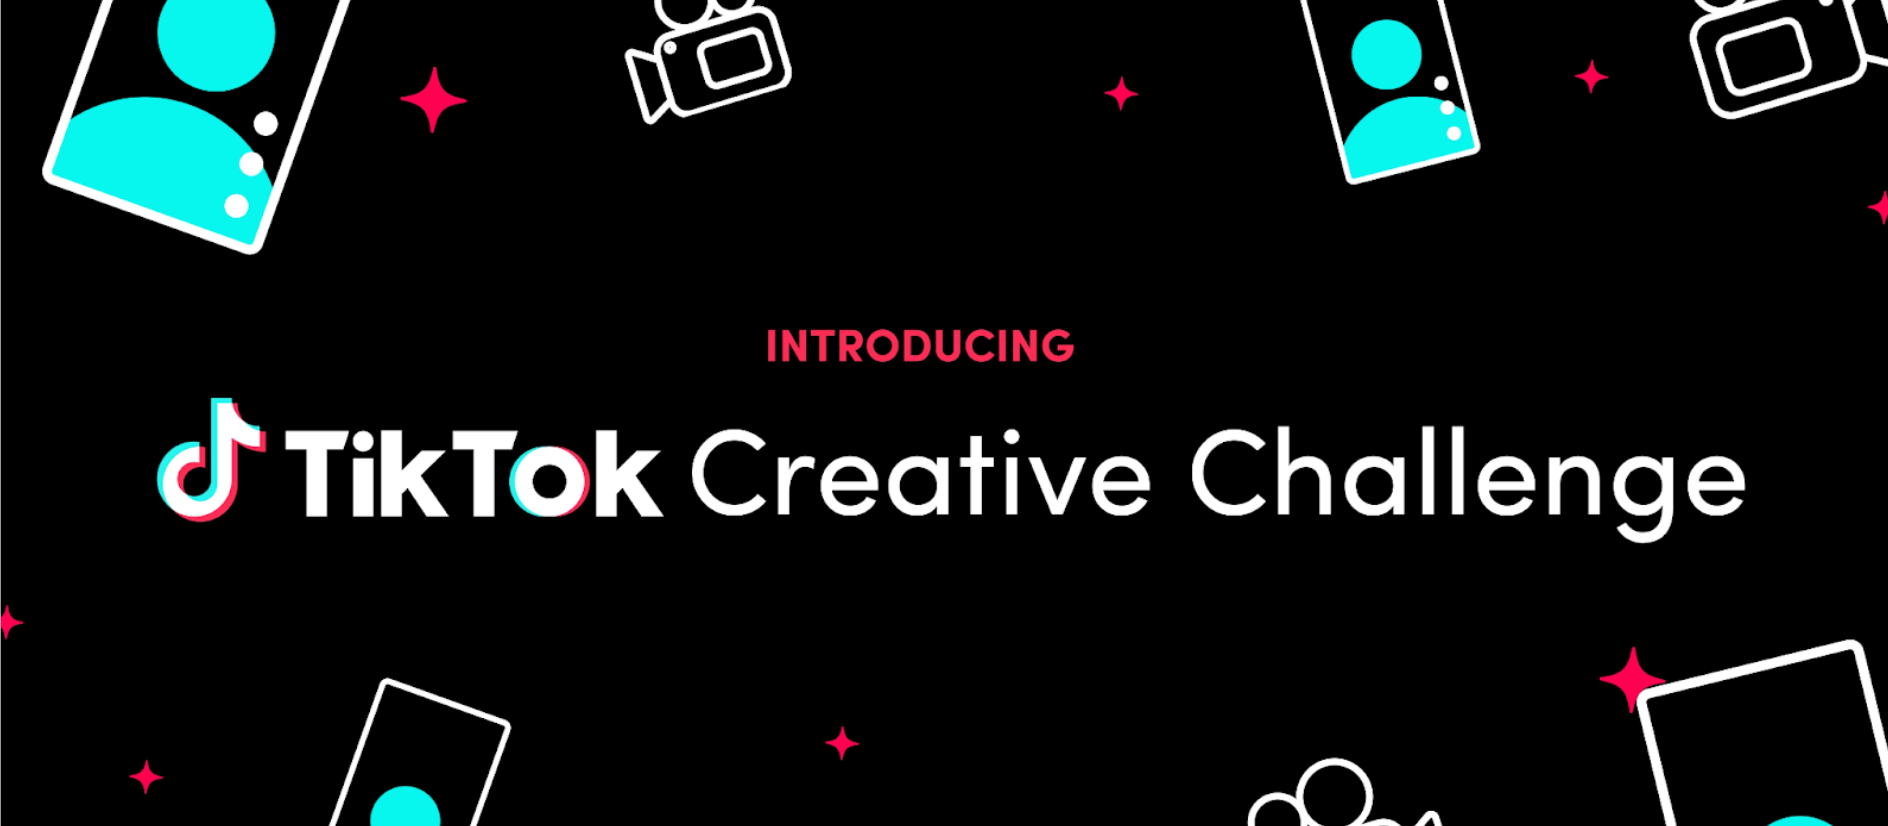 TikTok: Make Ad, Get Paid. (Oh, Actually, Naw. We Won’t Pay You LOL)